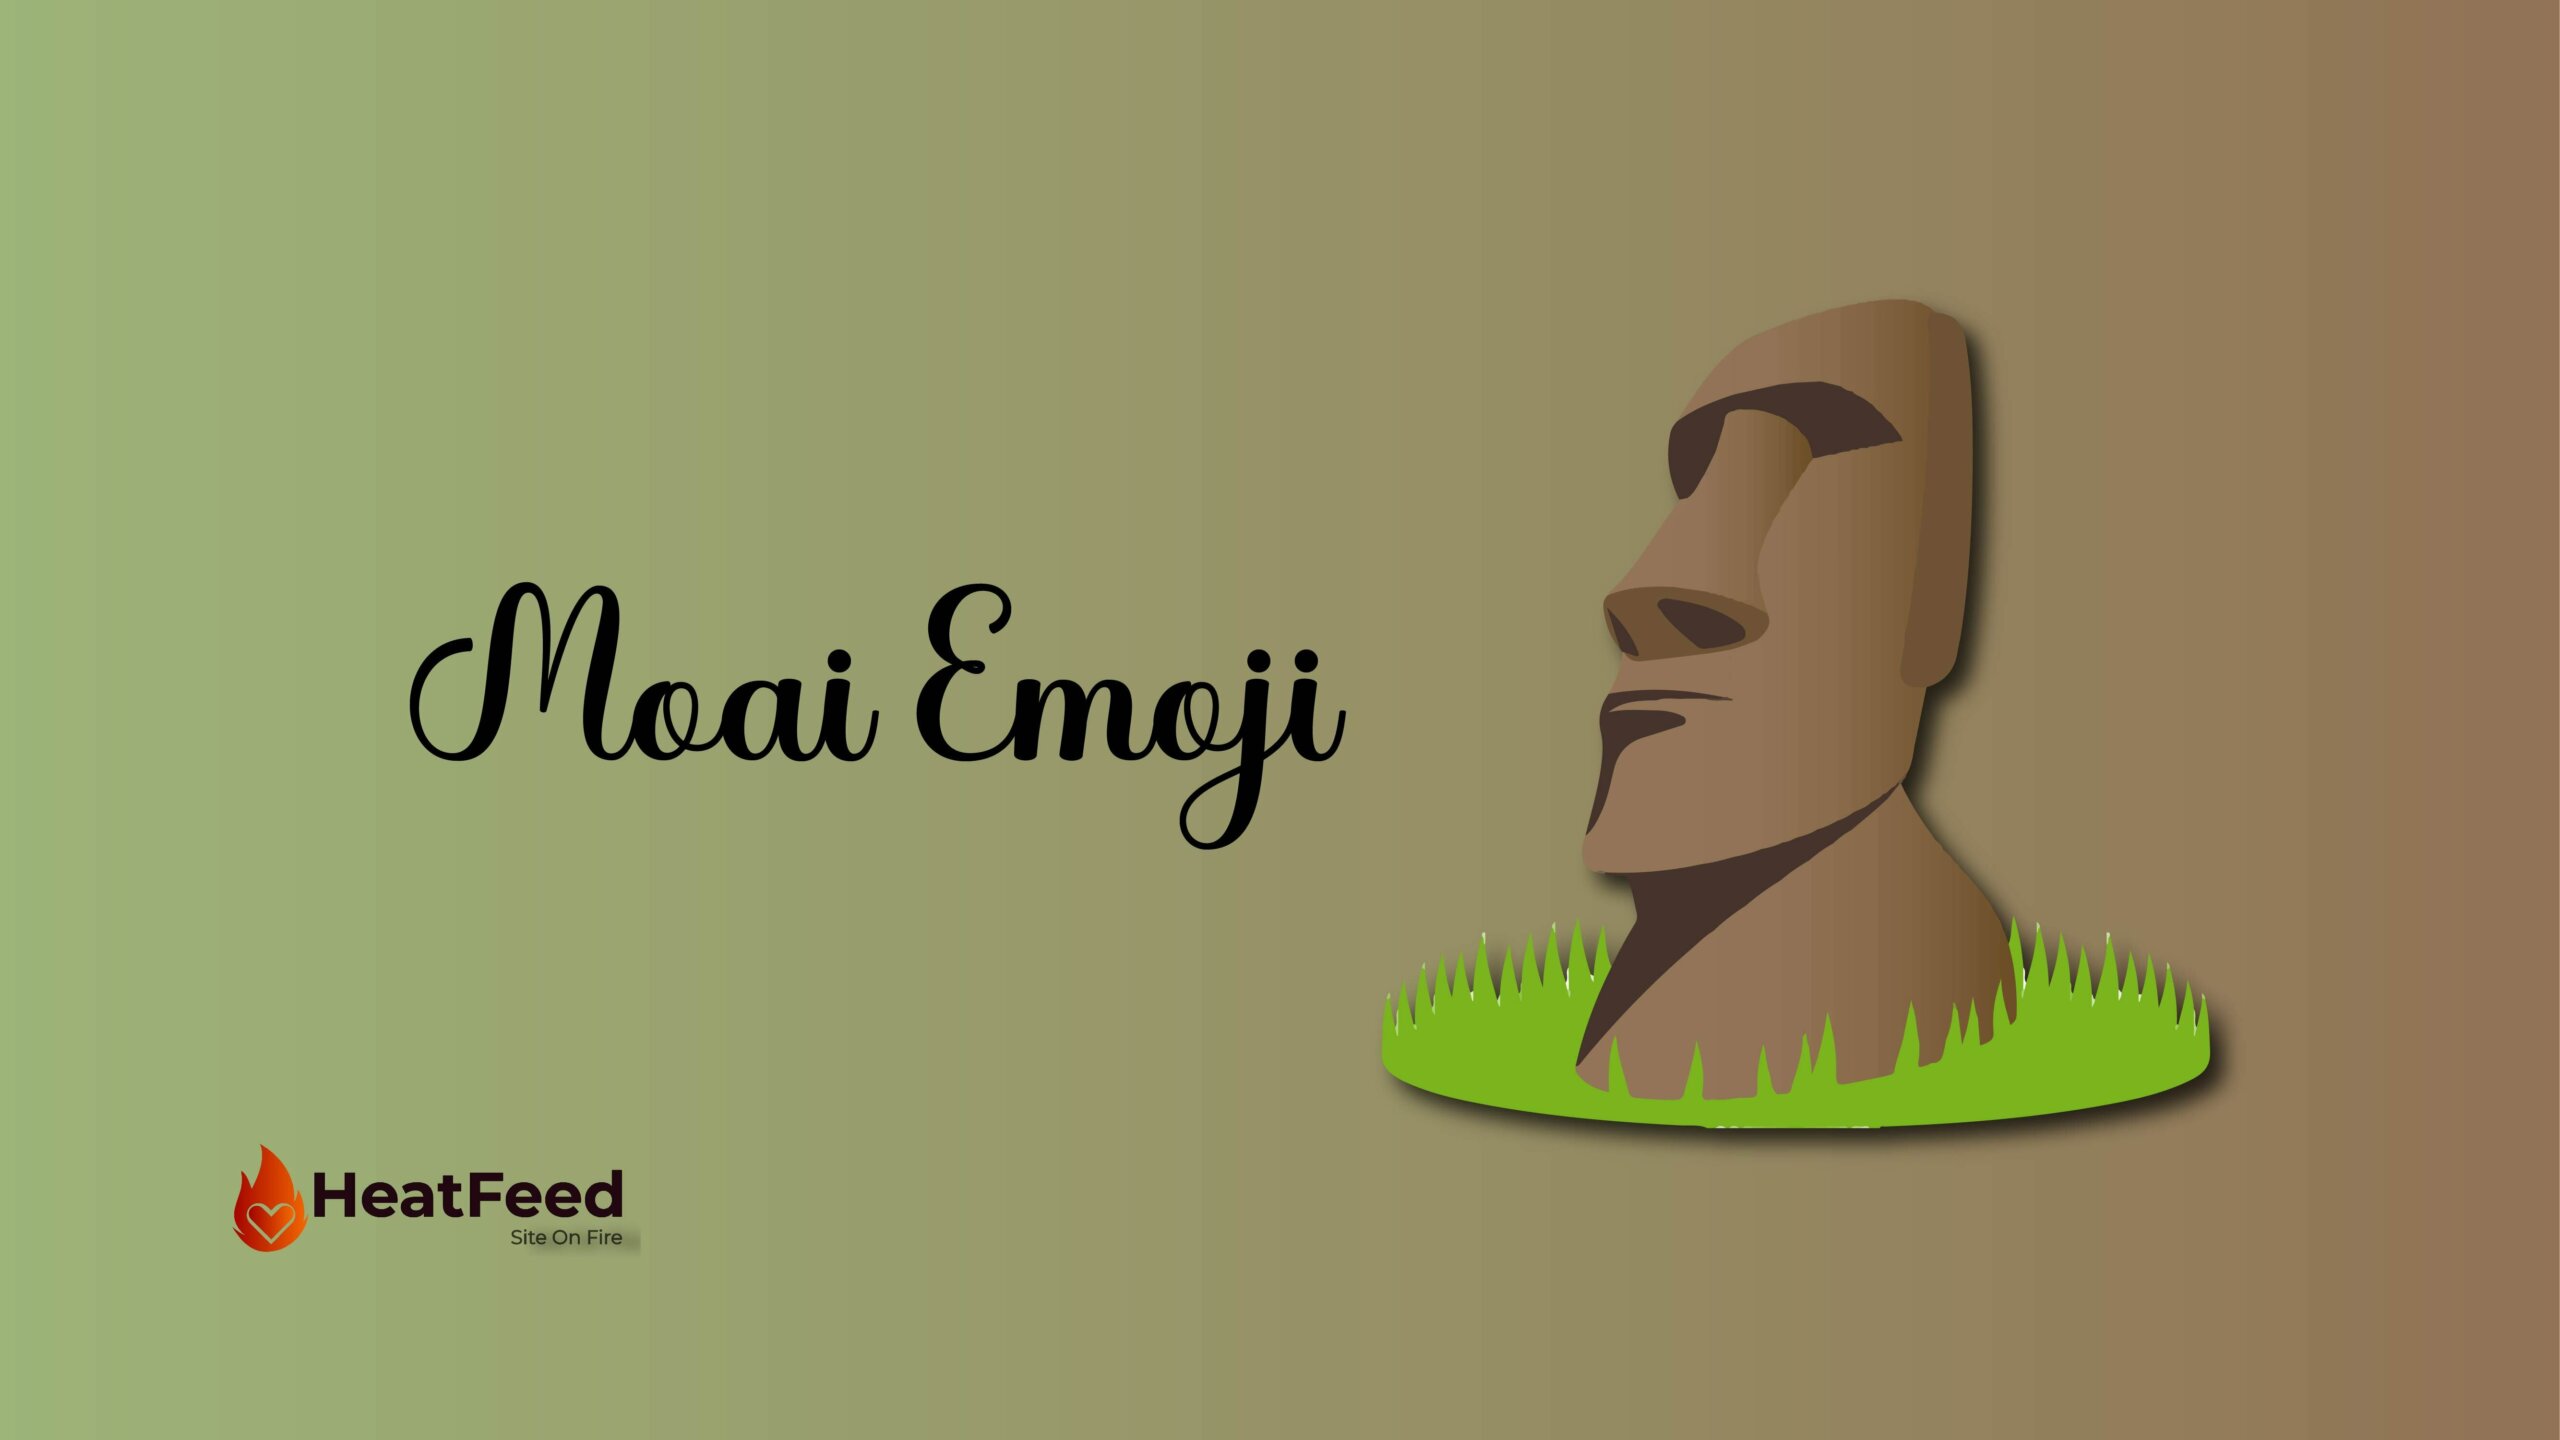 All the different moai. 🗿was the last emoji I copied on my clipboard :  r/shitposting